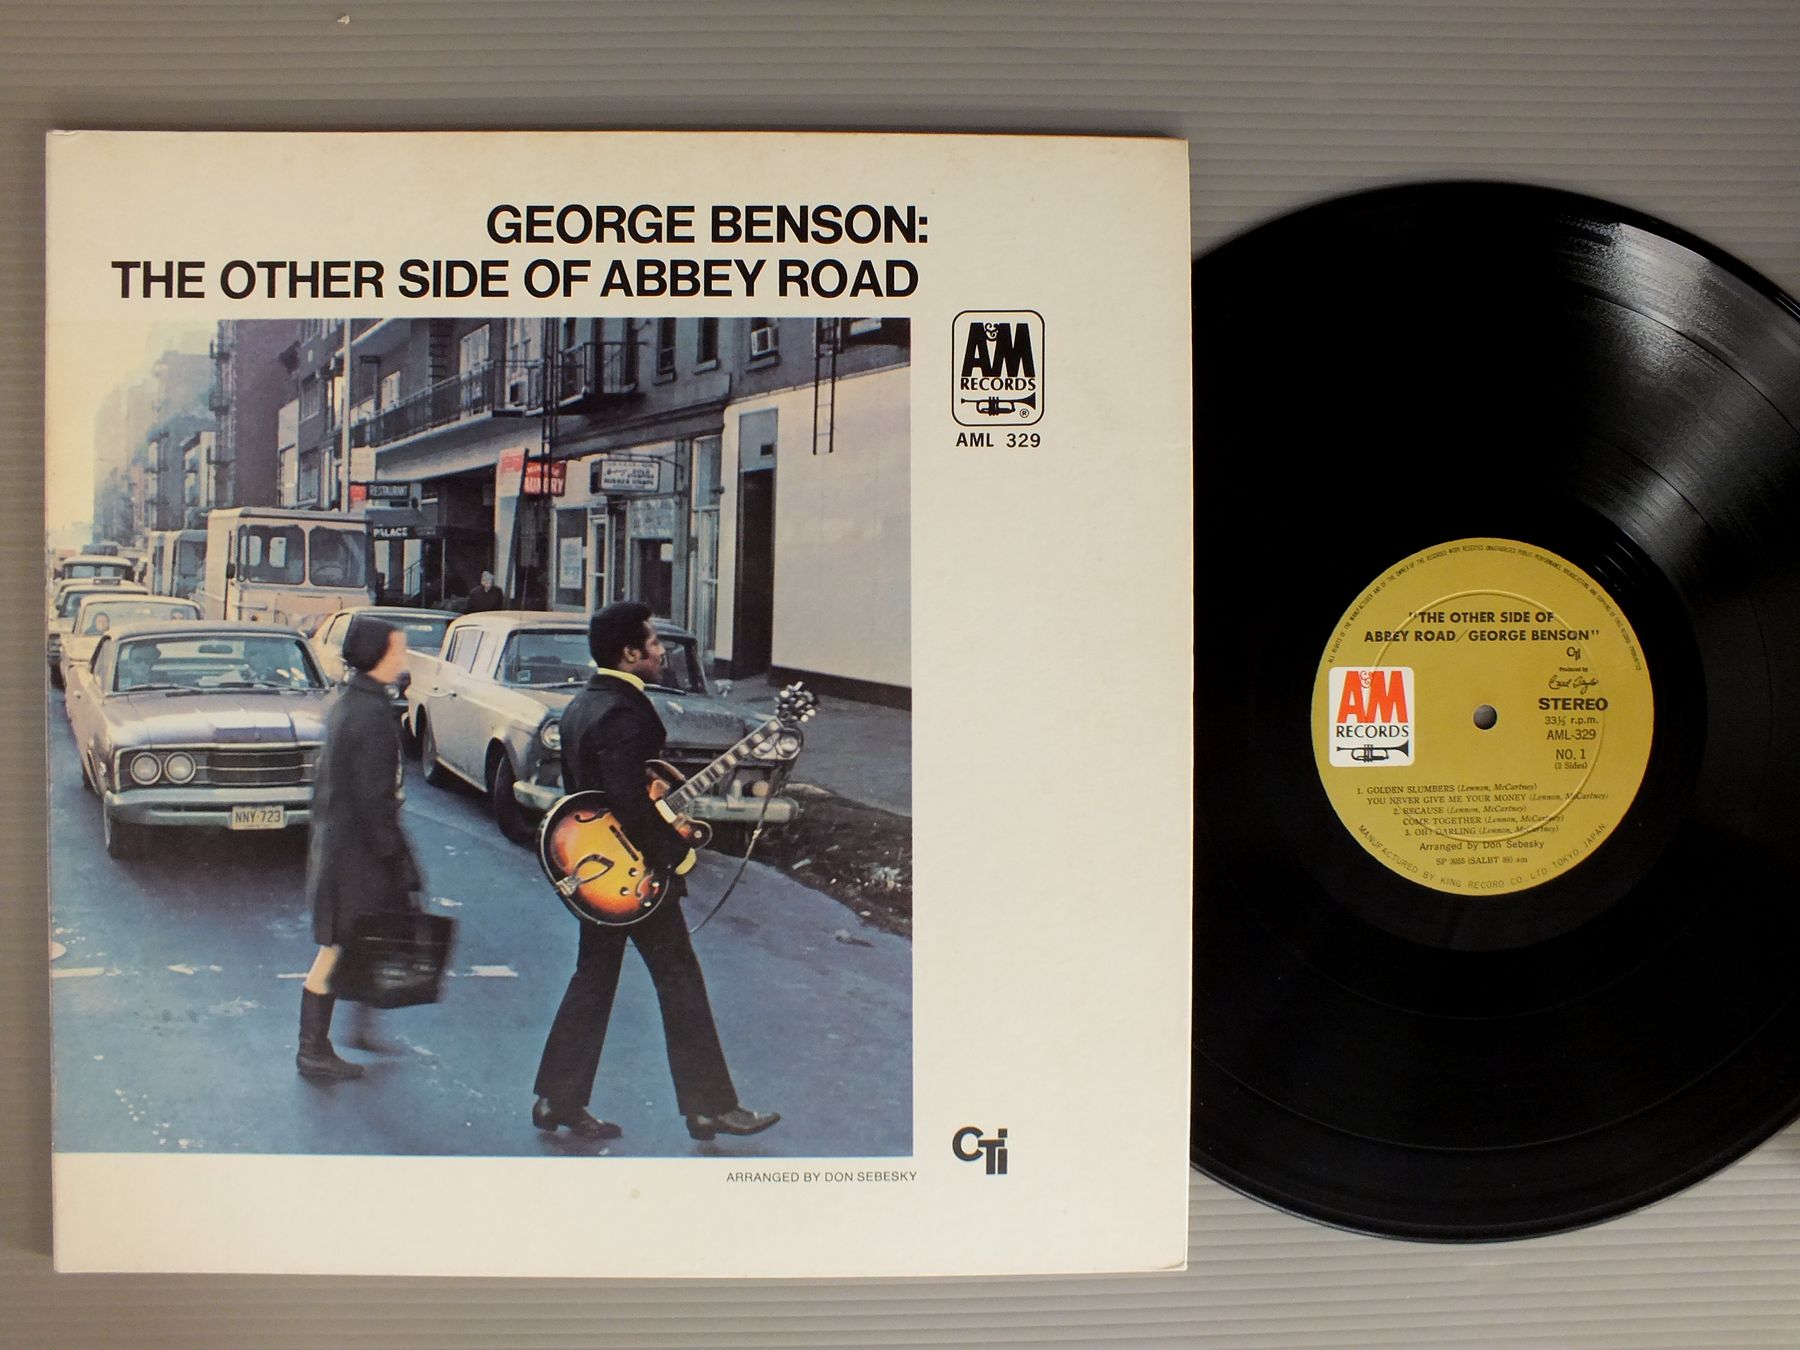 The Other Side of Abbey Road